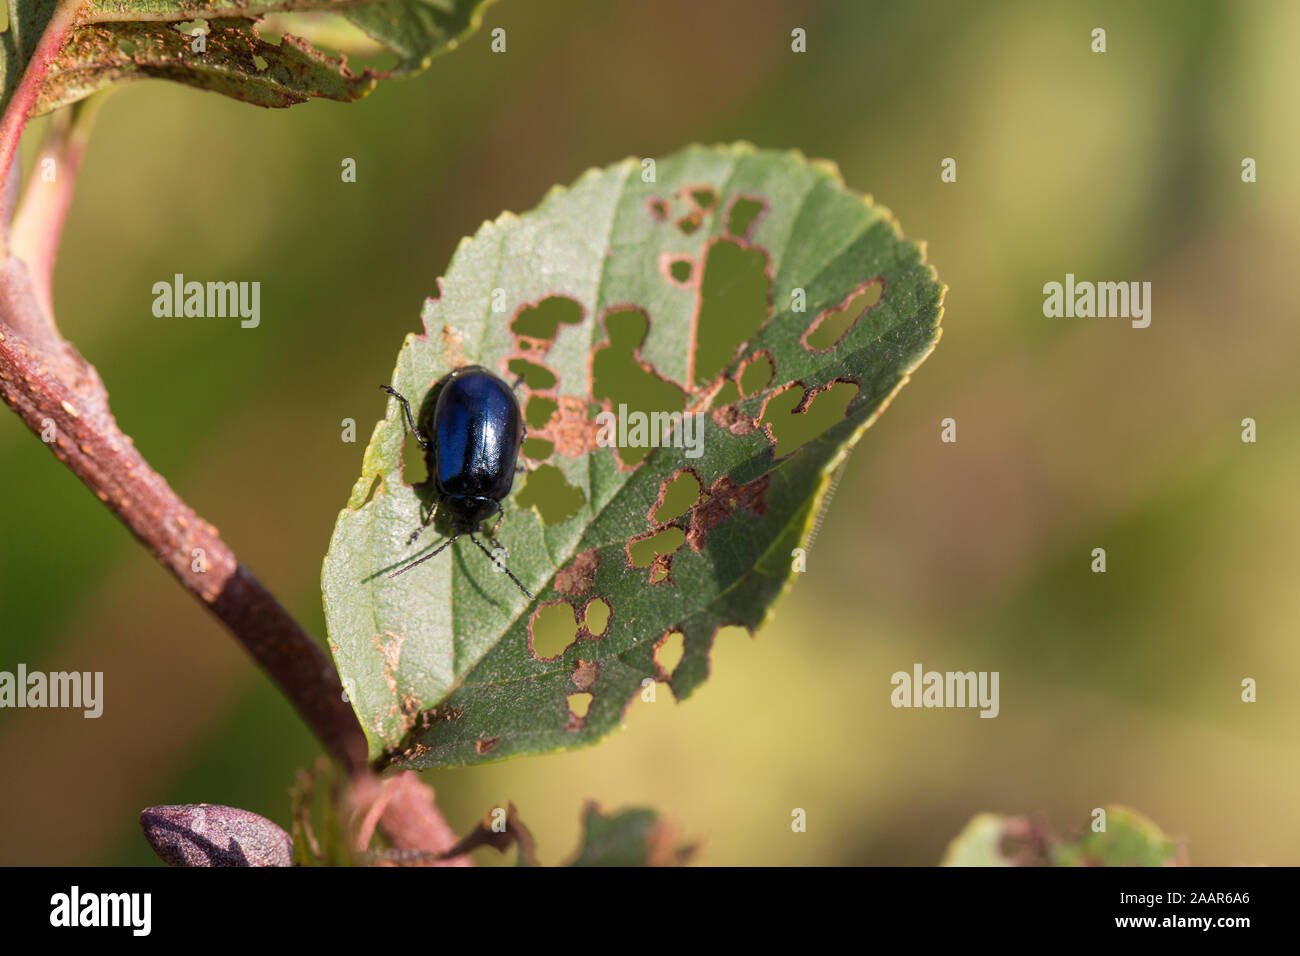 An example of the alder leaf beetle, Agelastica alni, on an alder leaf, Alnus glutinosa. After an absence of several decades it has re-established its Stock Photo